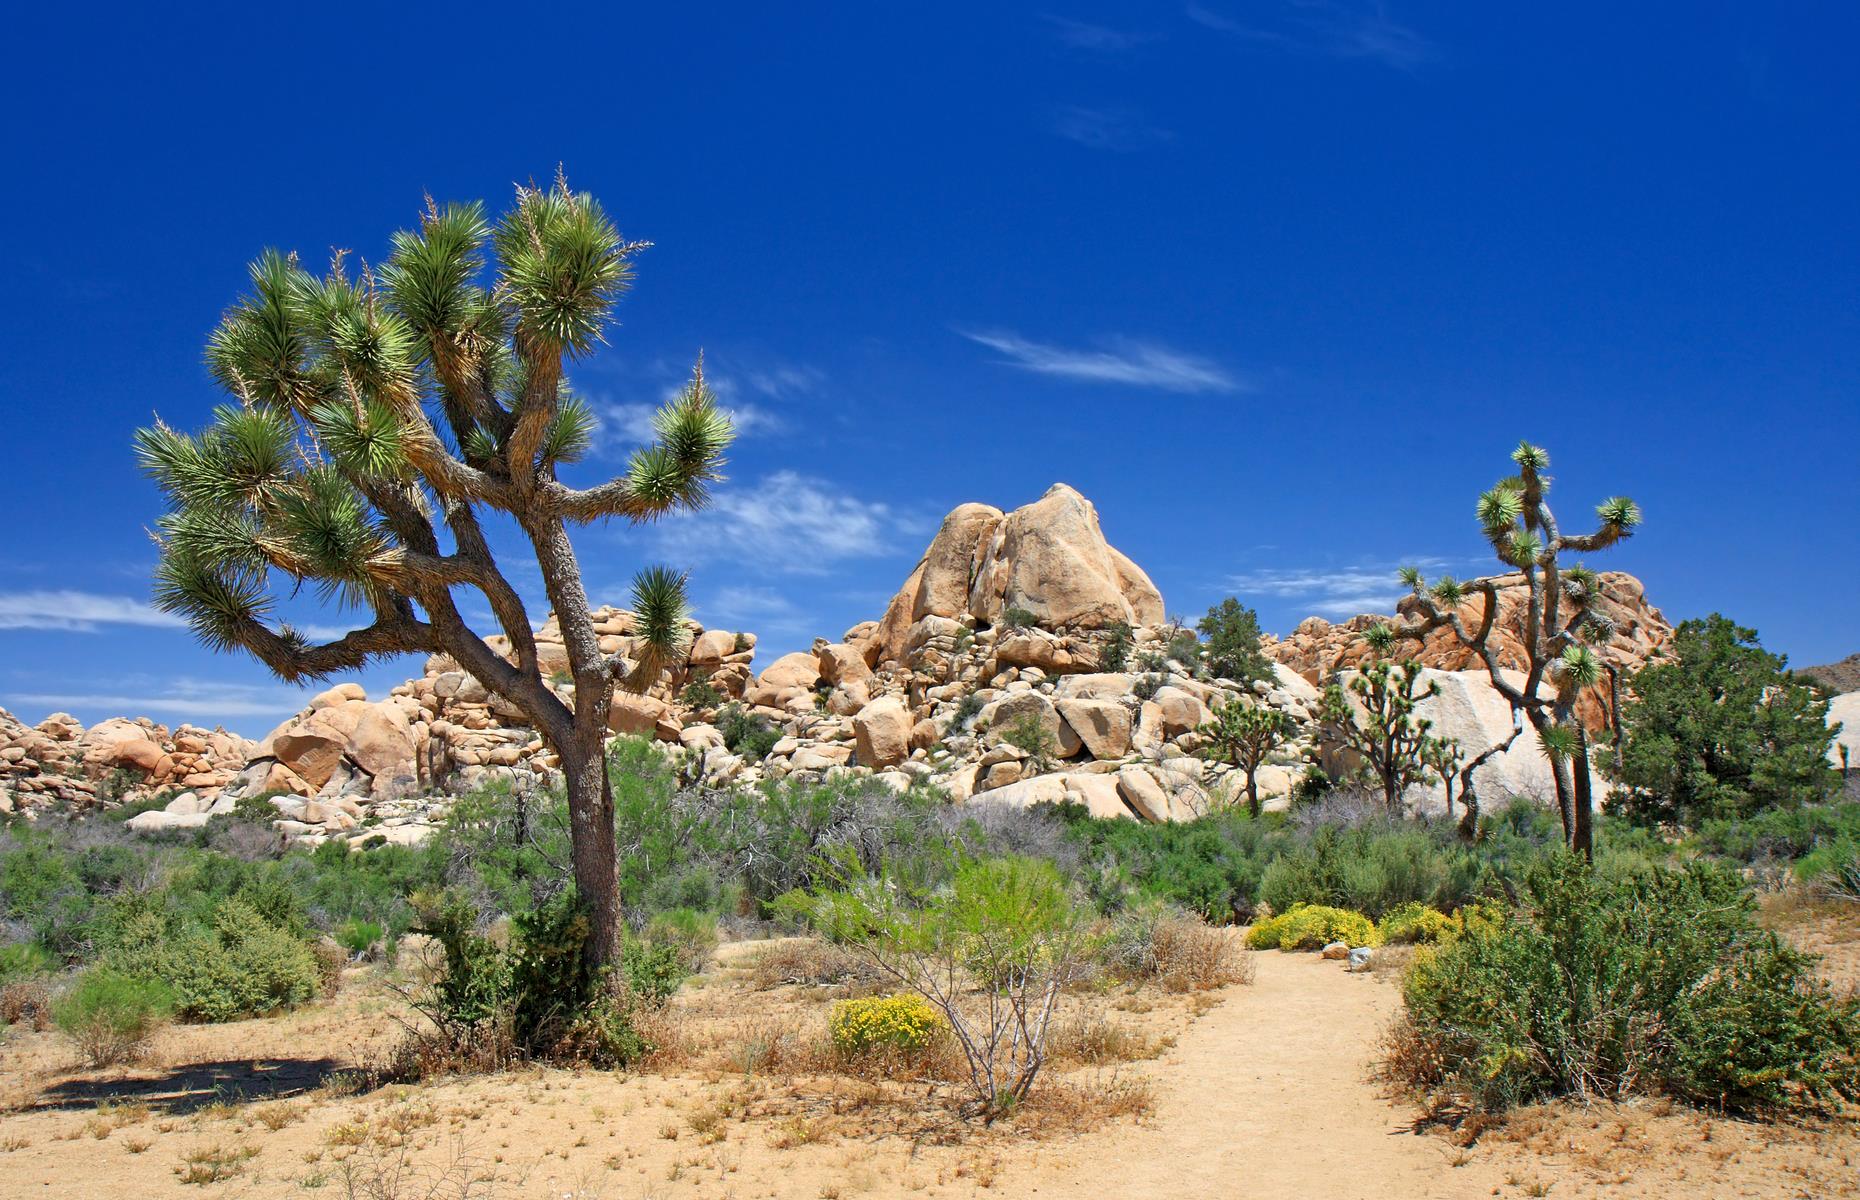 <p>Camping spots and hiking trails fill quickly at this beautifully bizarre national park during peak summer months, despite the often uncomfortably hot temperatures. Visit <a href="https://www.nps.gov/jotr/index.htm">Joshua Tree</a> – named for the spindly, spiky trees dotted throughout the landscape – in winter or spring instead. It’ll still be mild enough to sleep under canvas and gaze at the inky, star-filled night skies, while the desert trails and boulders should be far less crowded.</p>  <p><a href="https://www.loveexploring.com/galleries/97747/the-most-unique-place-to-camp-in-every-state-2021"><strong>Discover the most unique place to camp in every state</strong></a></p>